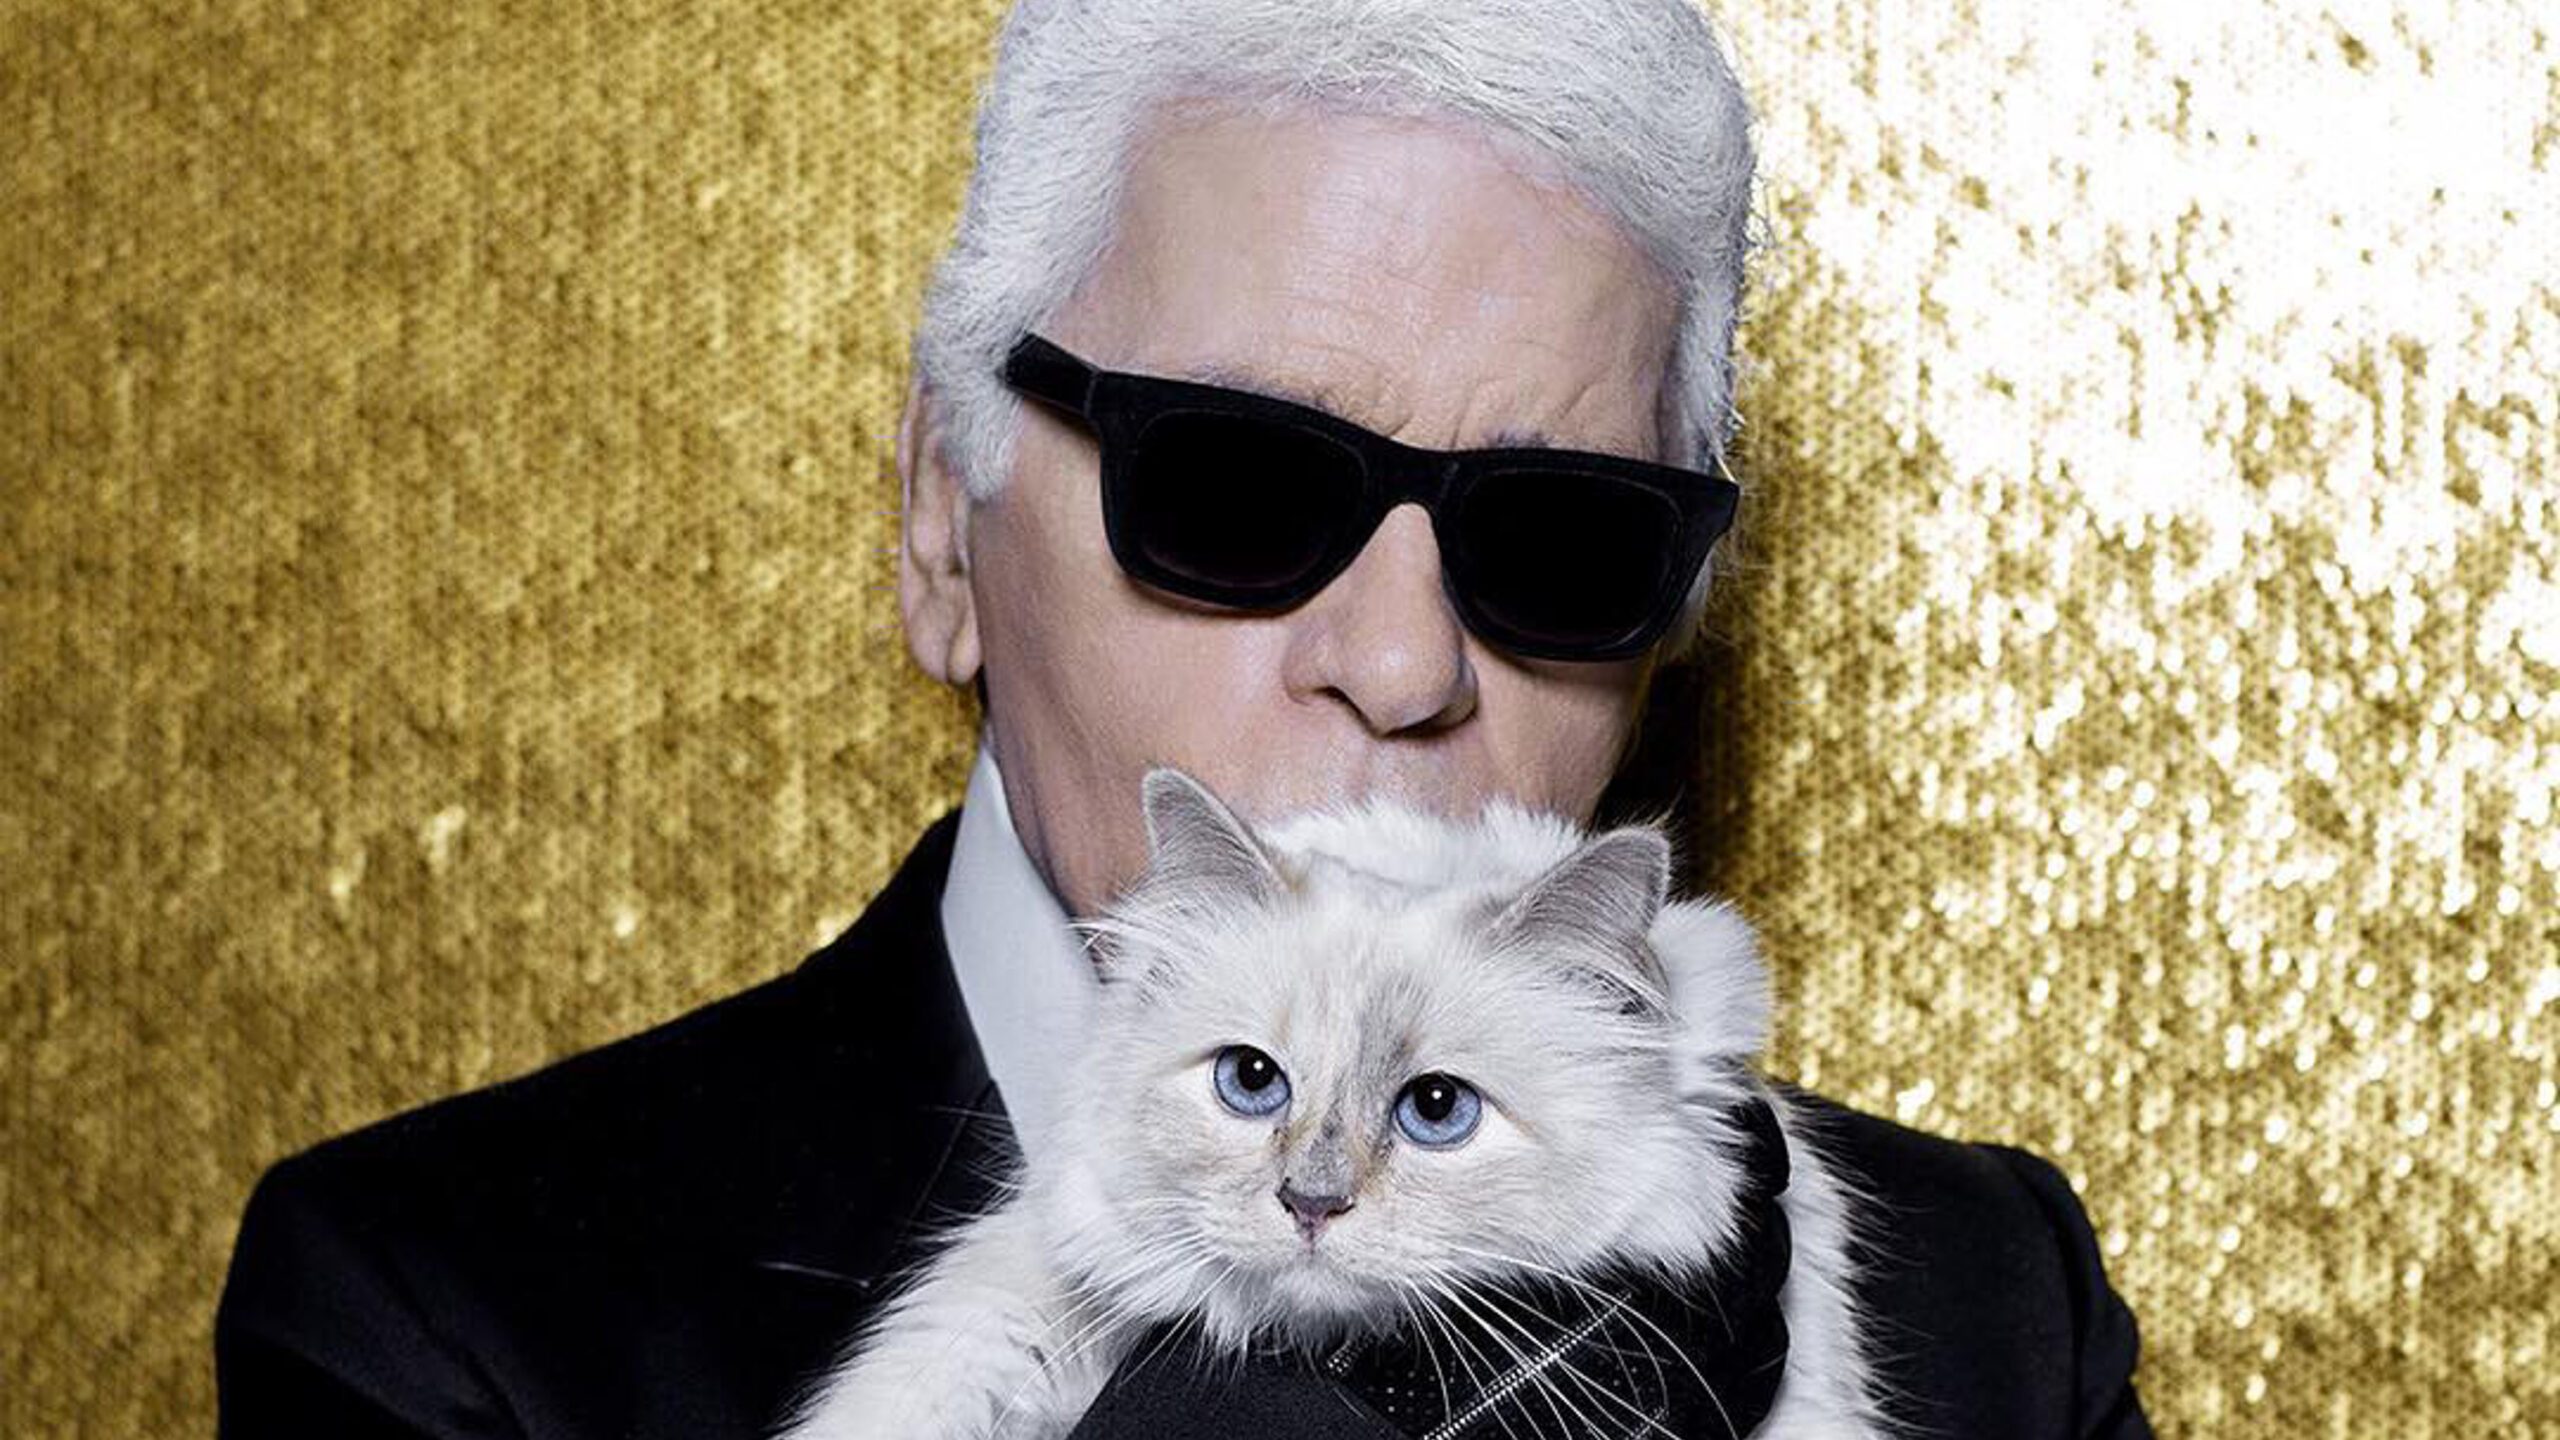 Karl Lagerfeld to collaborate with Vans